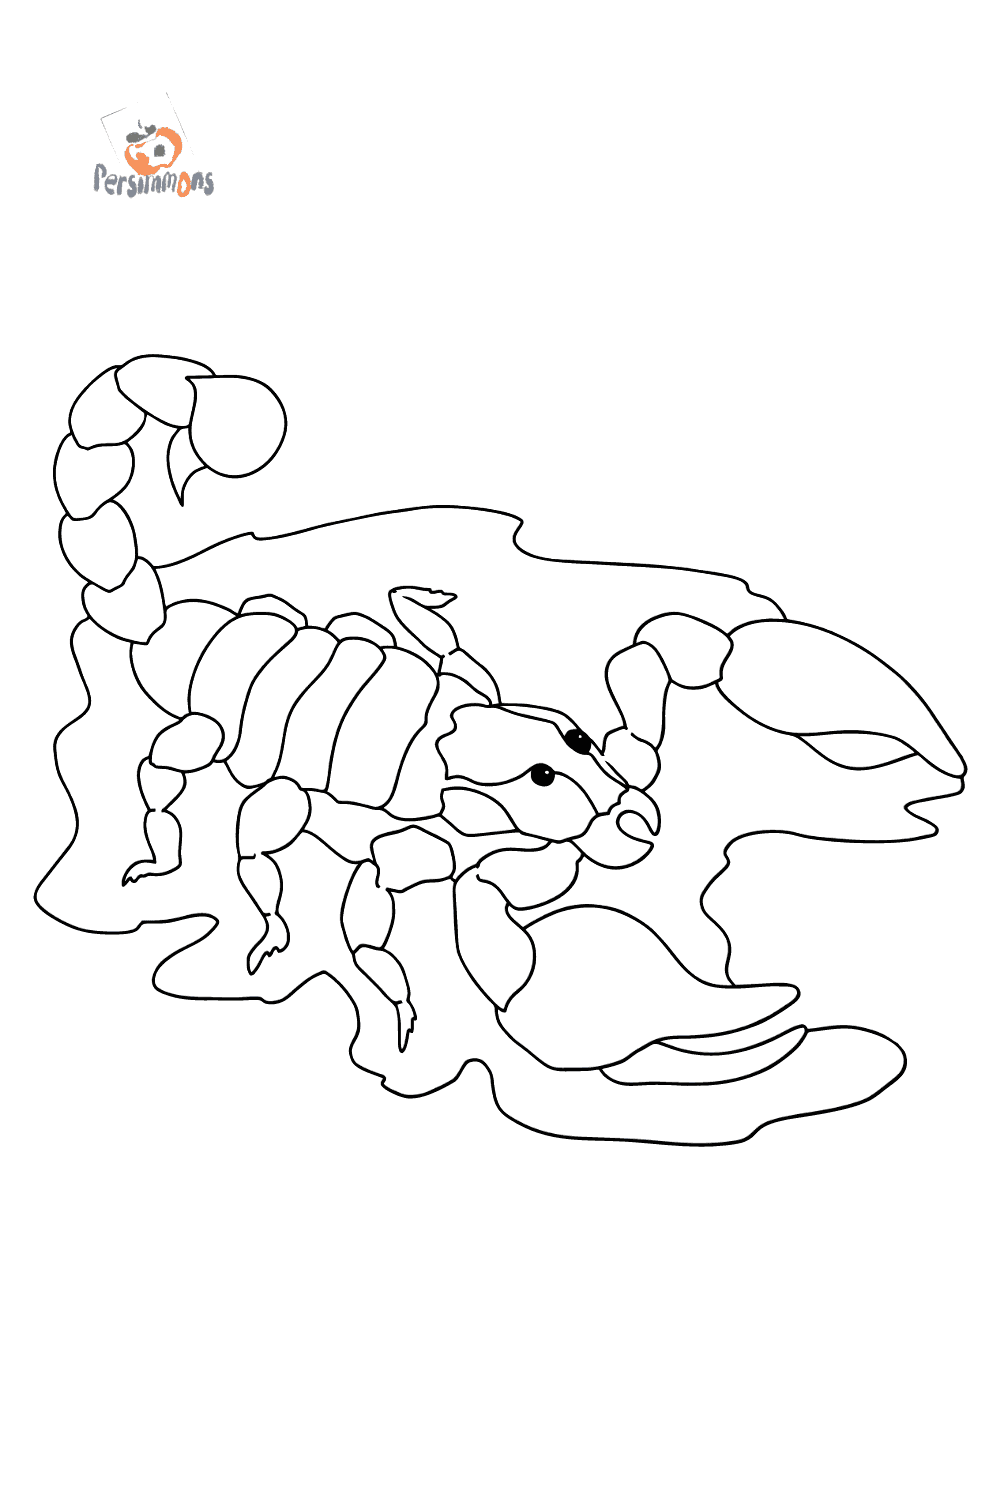 A Scorpion Coloring Page ♥ Online and Print for Free!